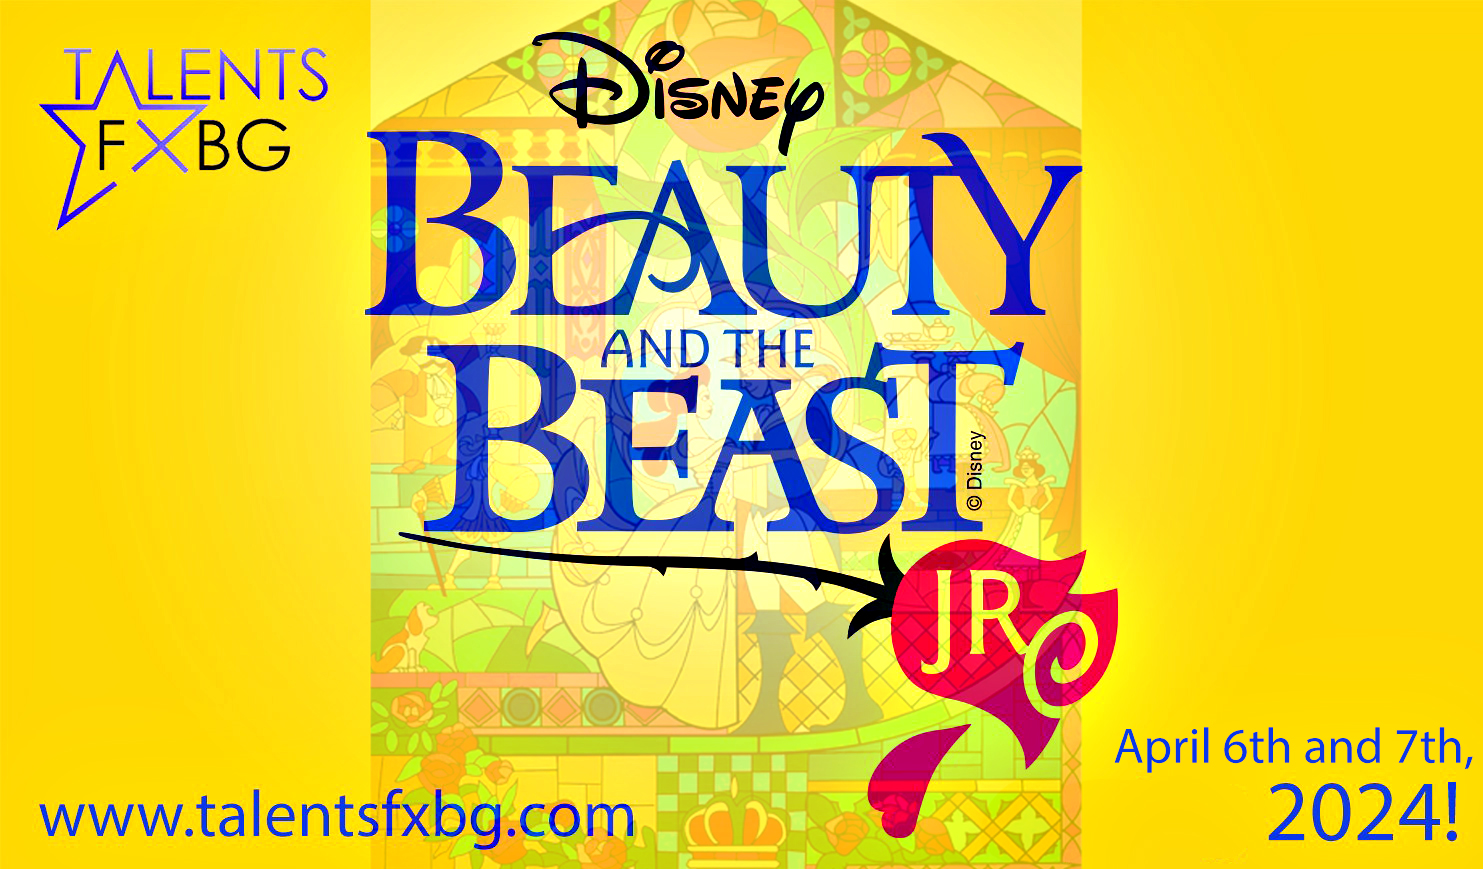 <h1 class="tribe-events-single-event-title">Beauty and the Beast, Jr.</h1>